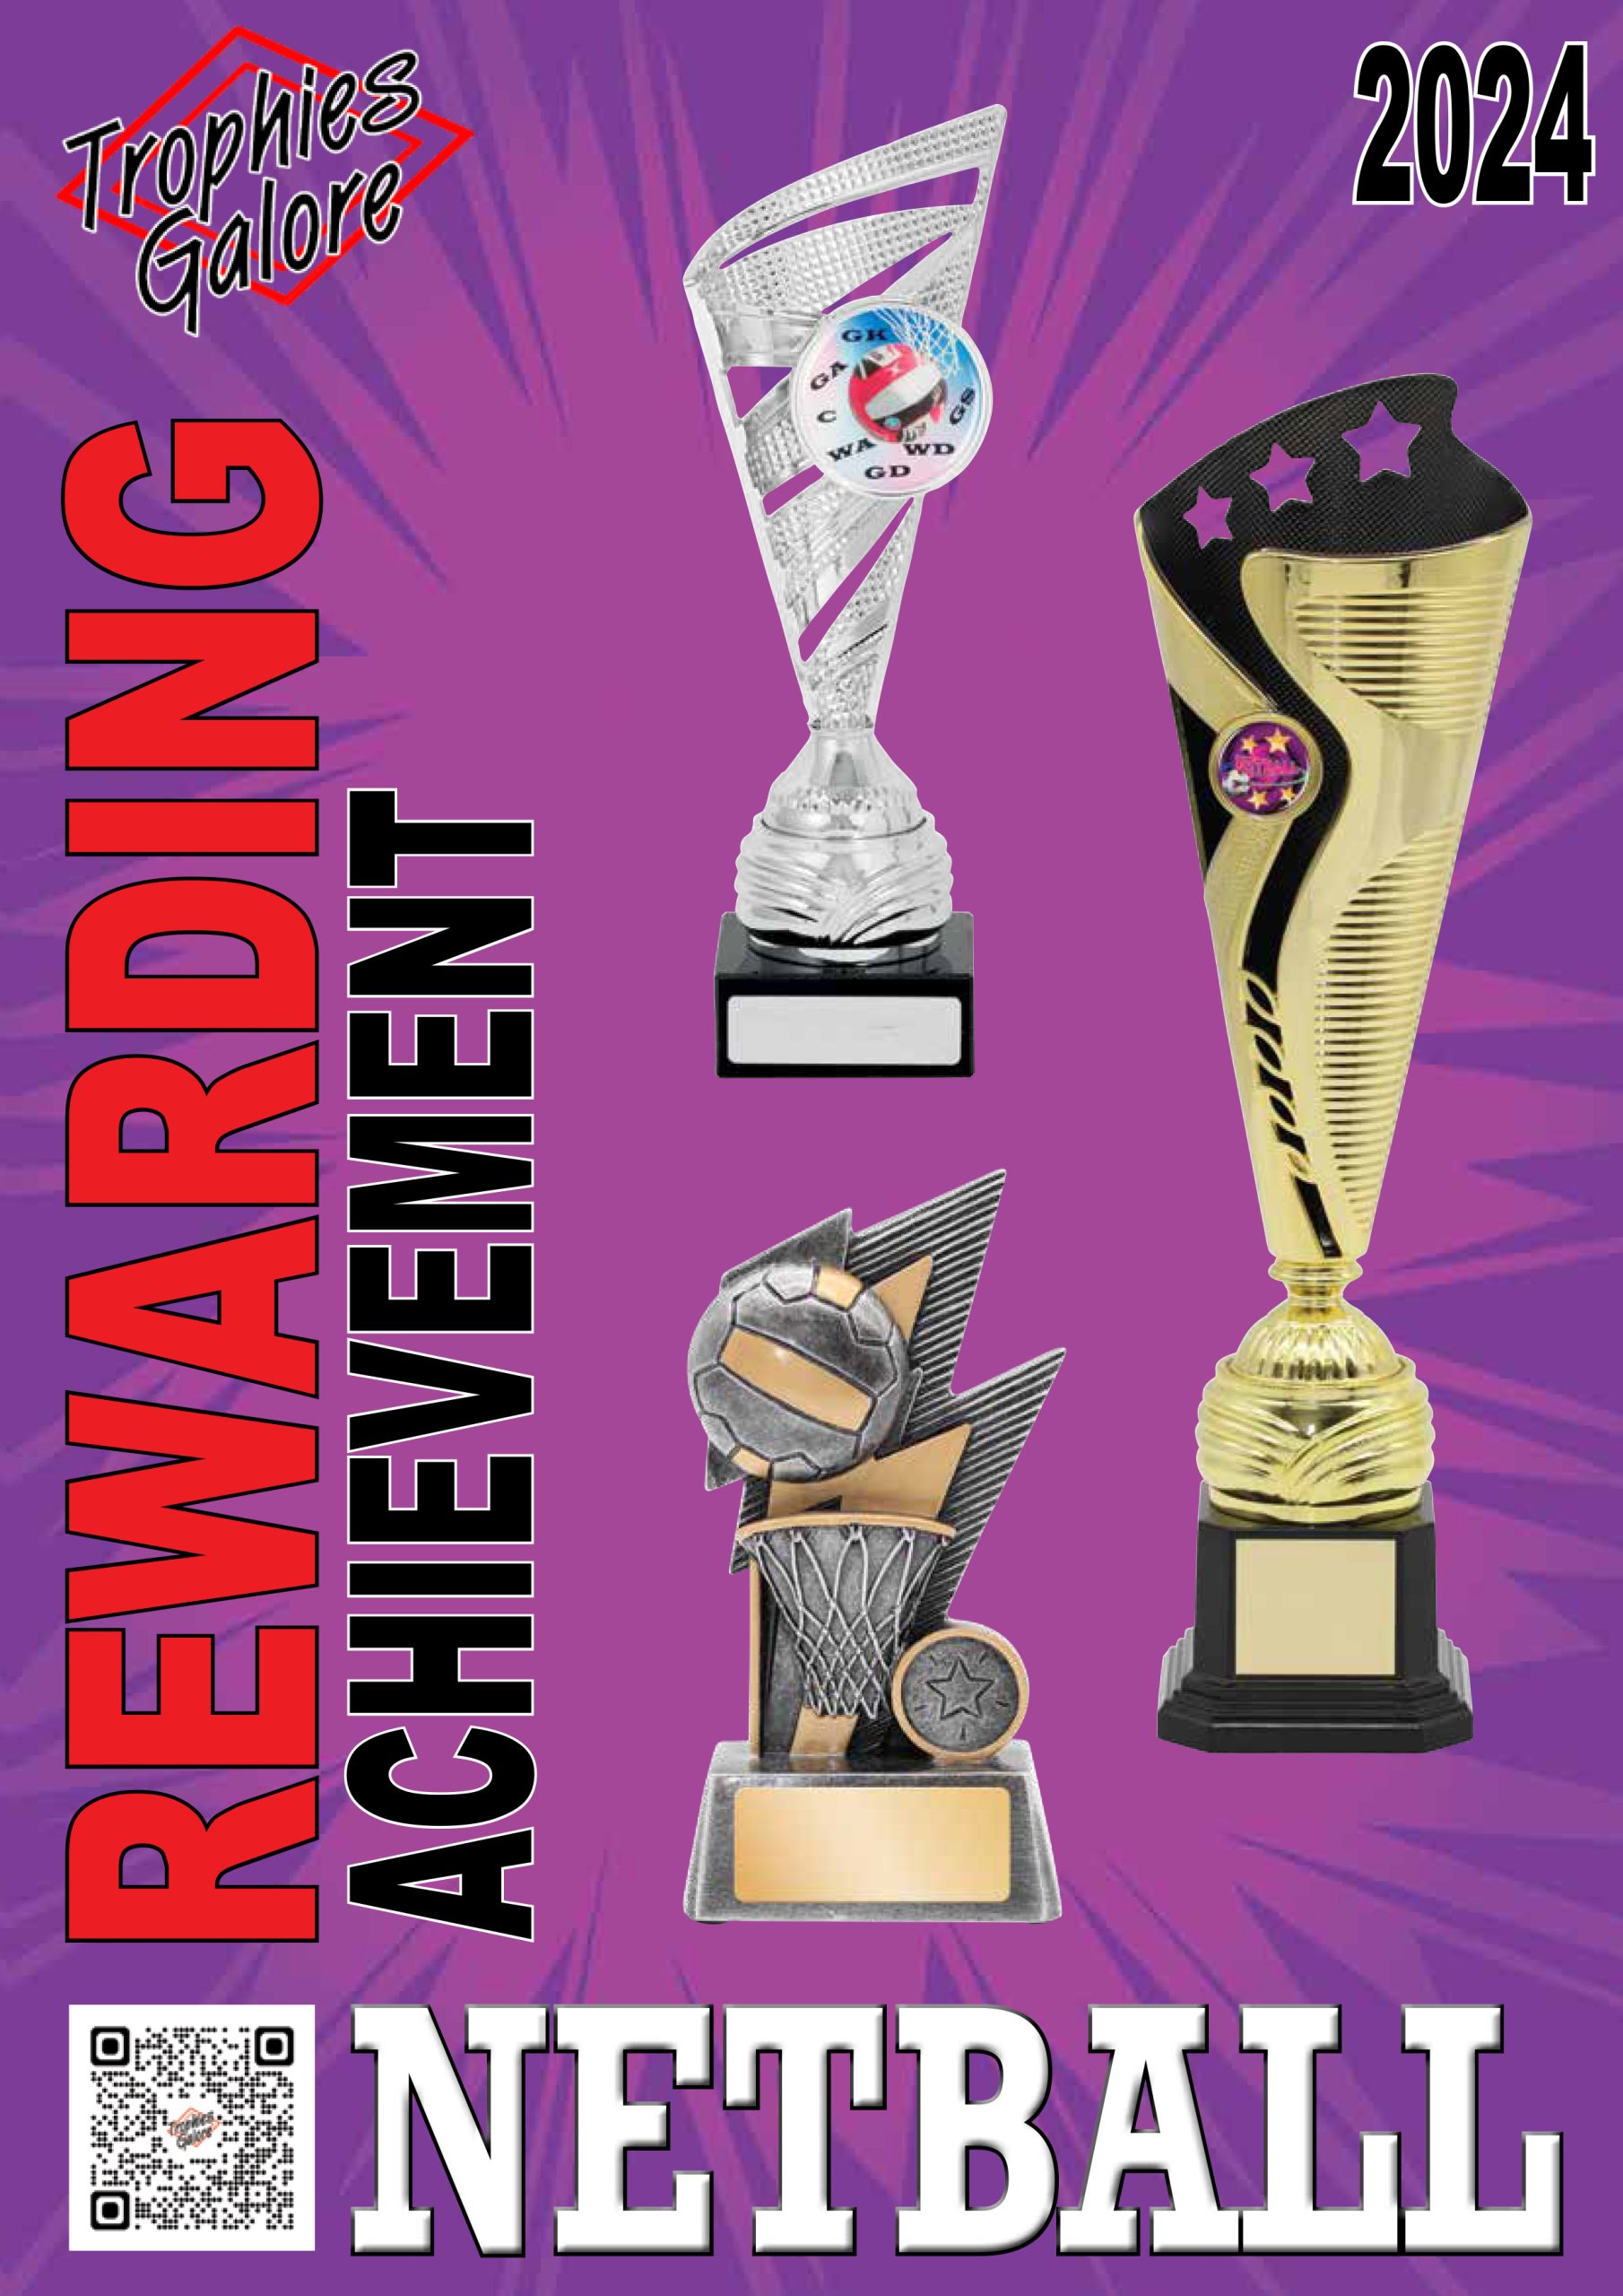 Trophies-Galore-2024-Netball-scaled.jpg